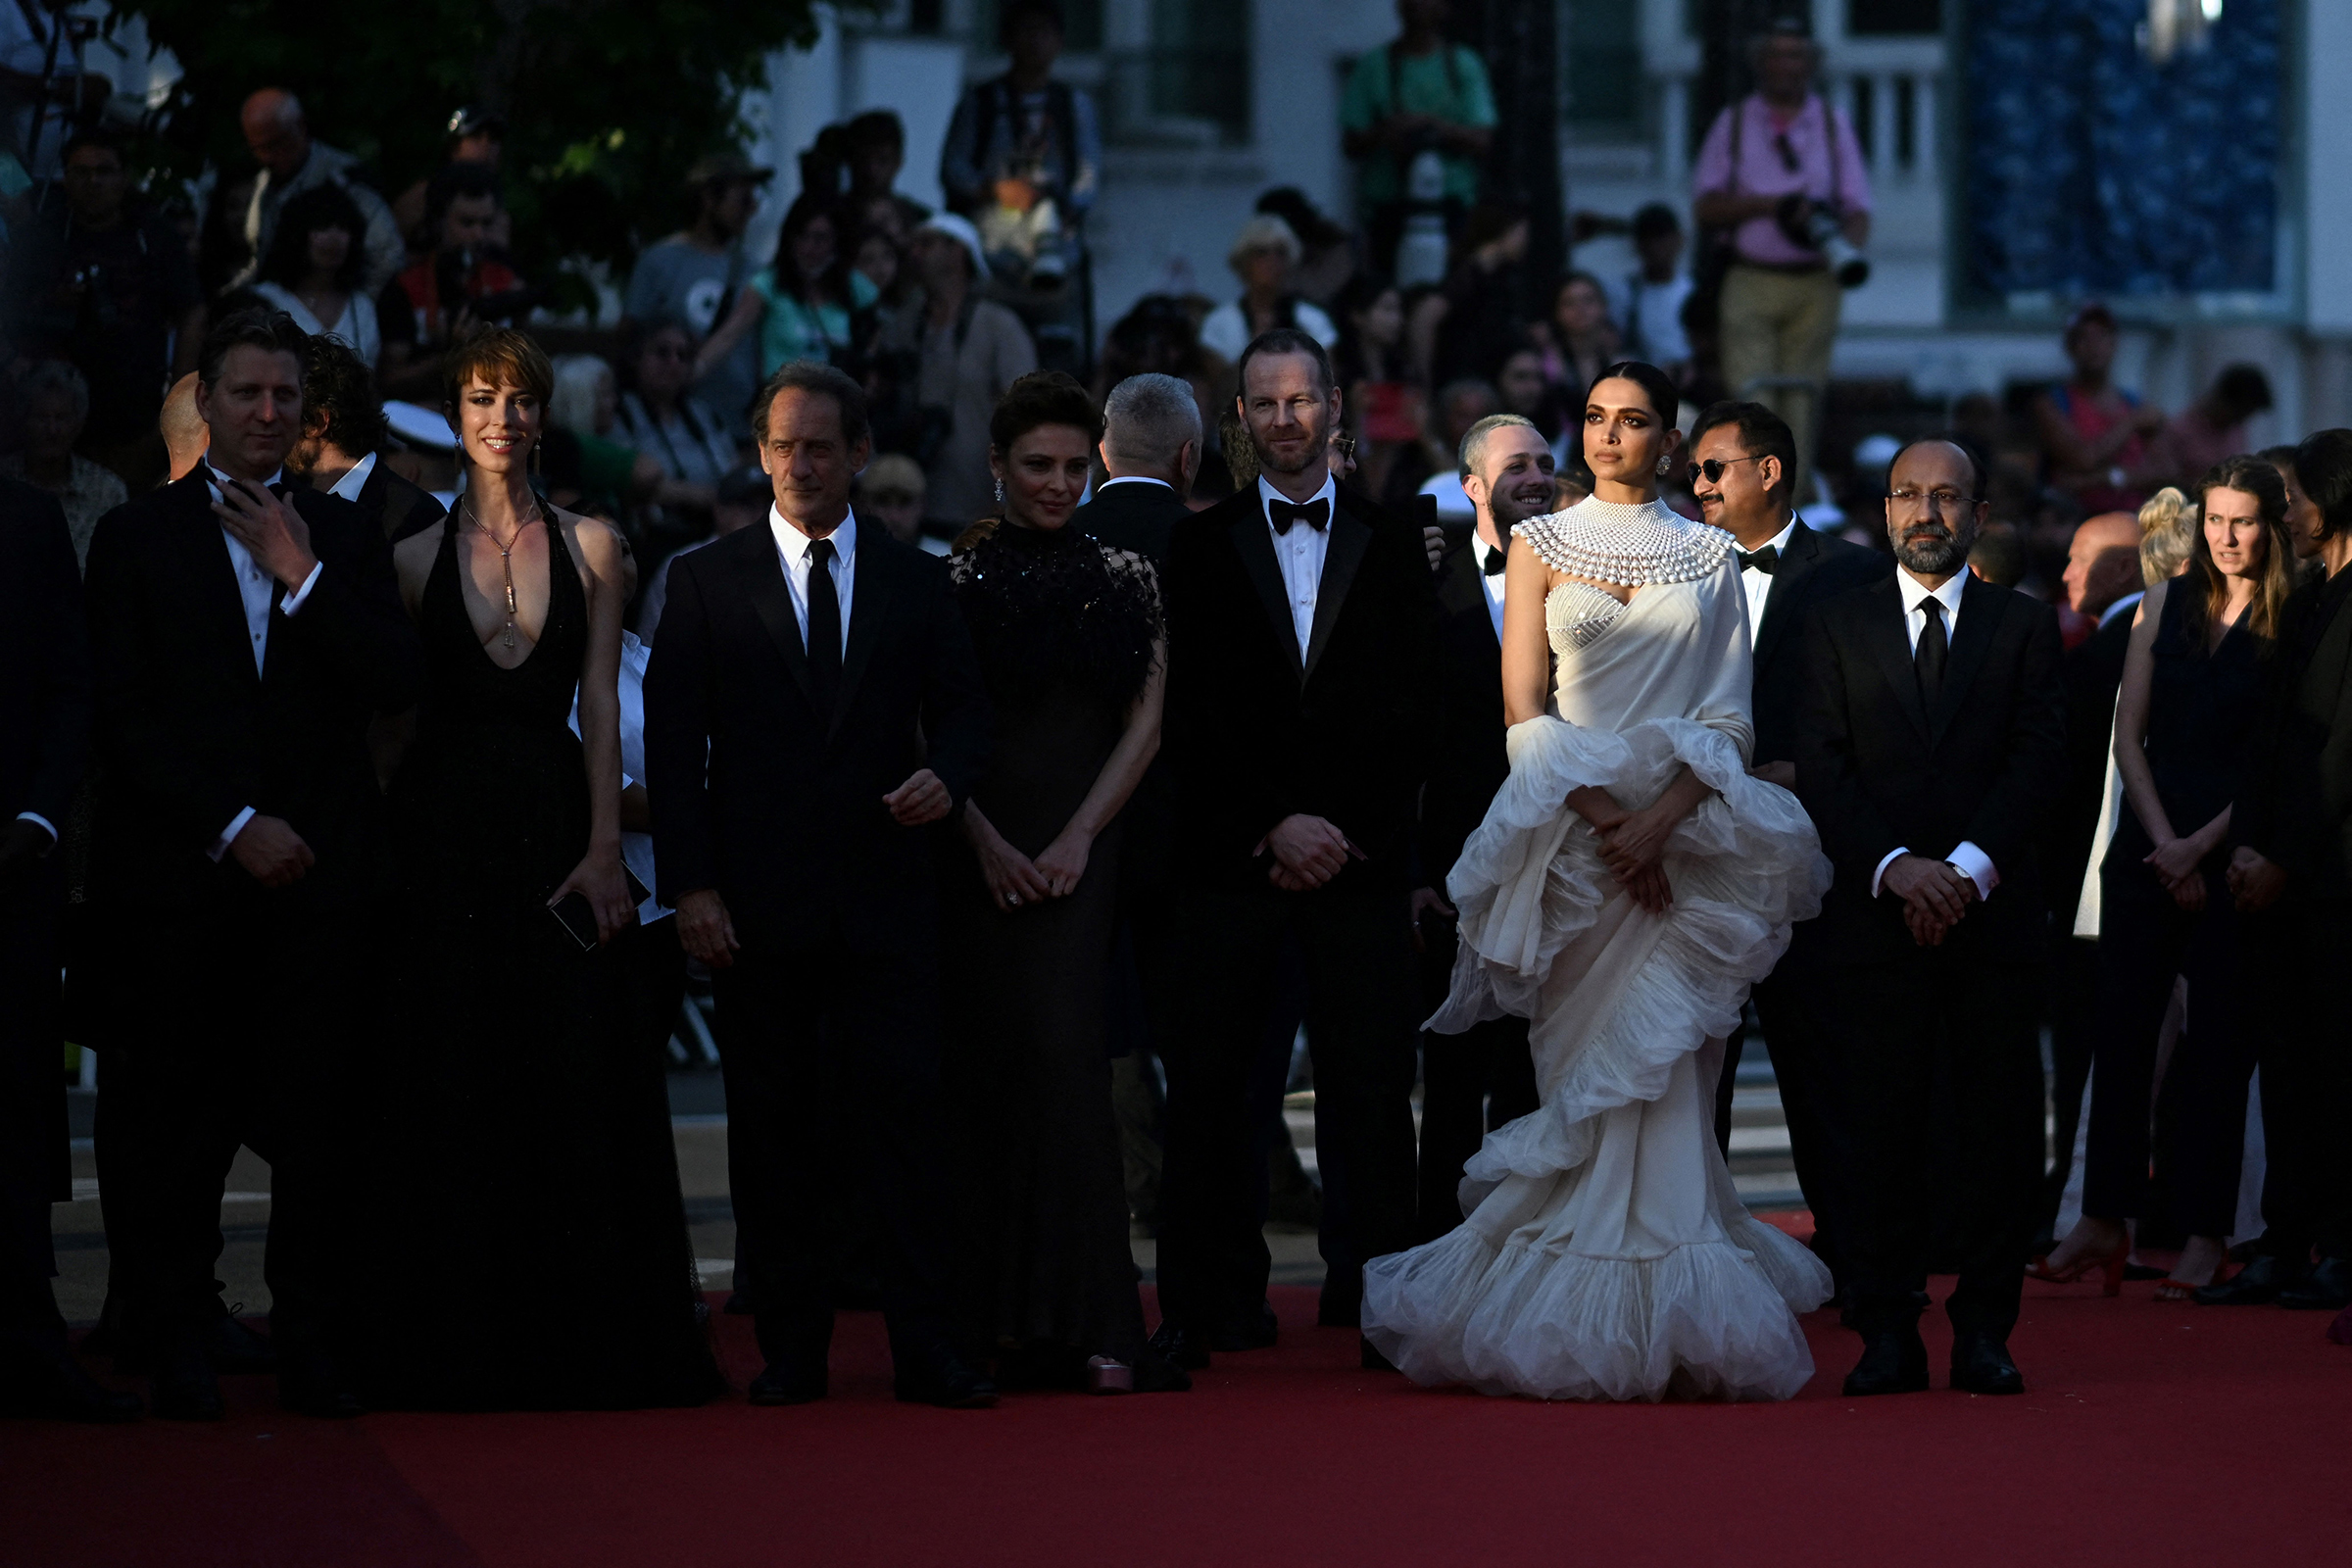 Padukone alongside jury members at the Cannes Film Festival closing ceremony on May 28, 2022. (Patrícia de Melo Moreira—AFP/Getty Images)